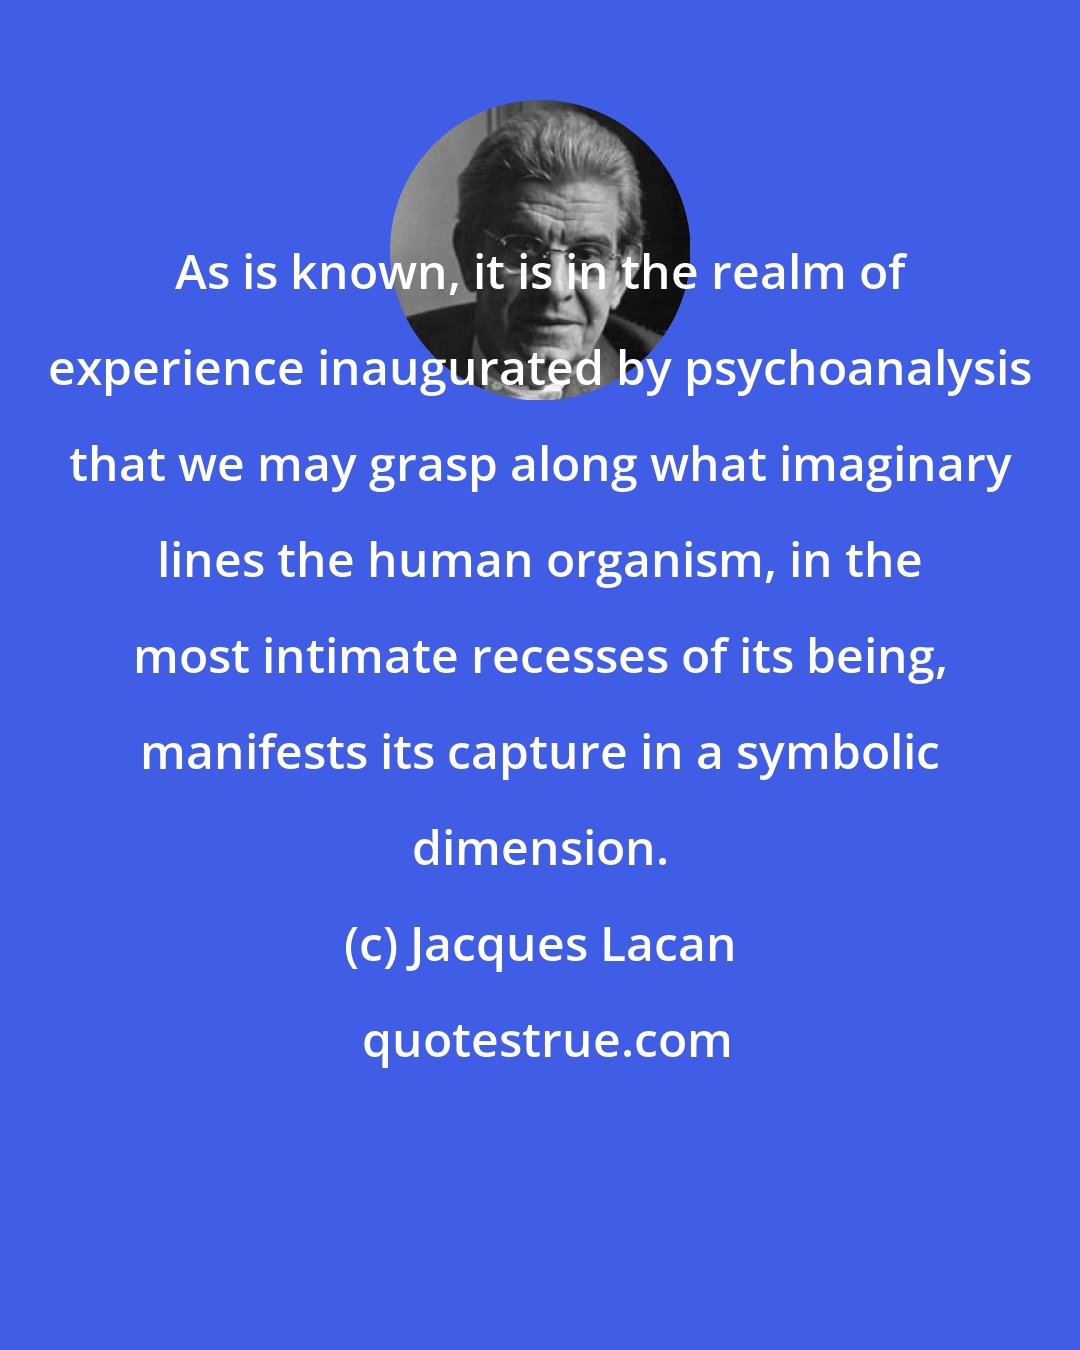 Jacques Lacan: As is known, it is in the realm of experience inaugurated by psychoanalysis that we may grasp along what imaginary lines the human organism, in the most intimate recesses of its being, manifests its capture in a symbolic dimension.